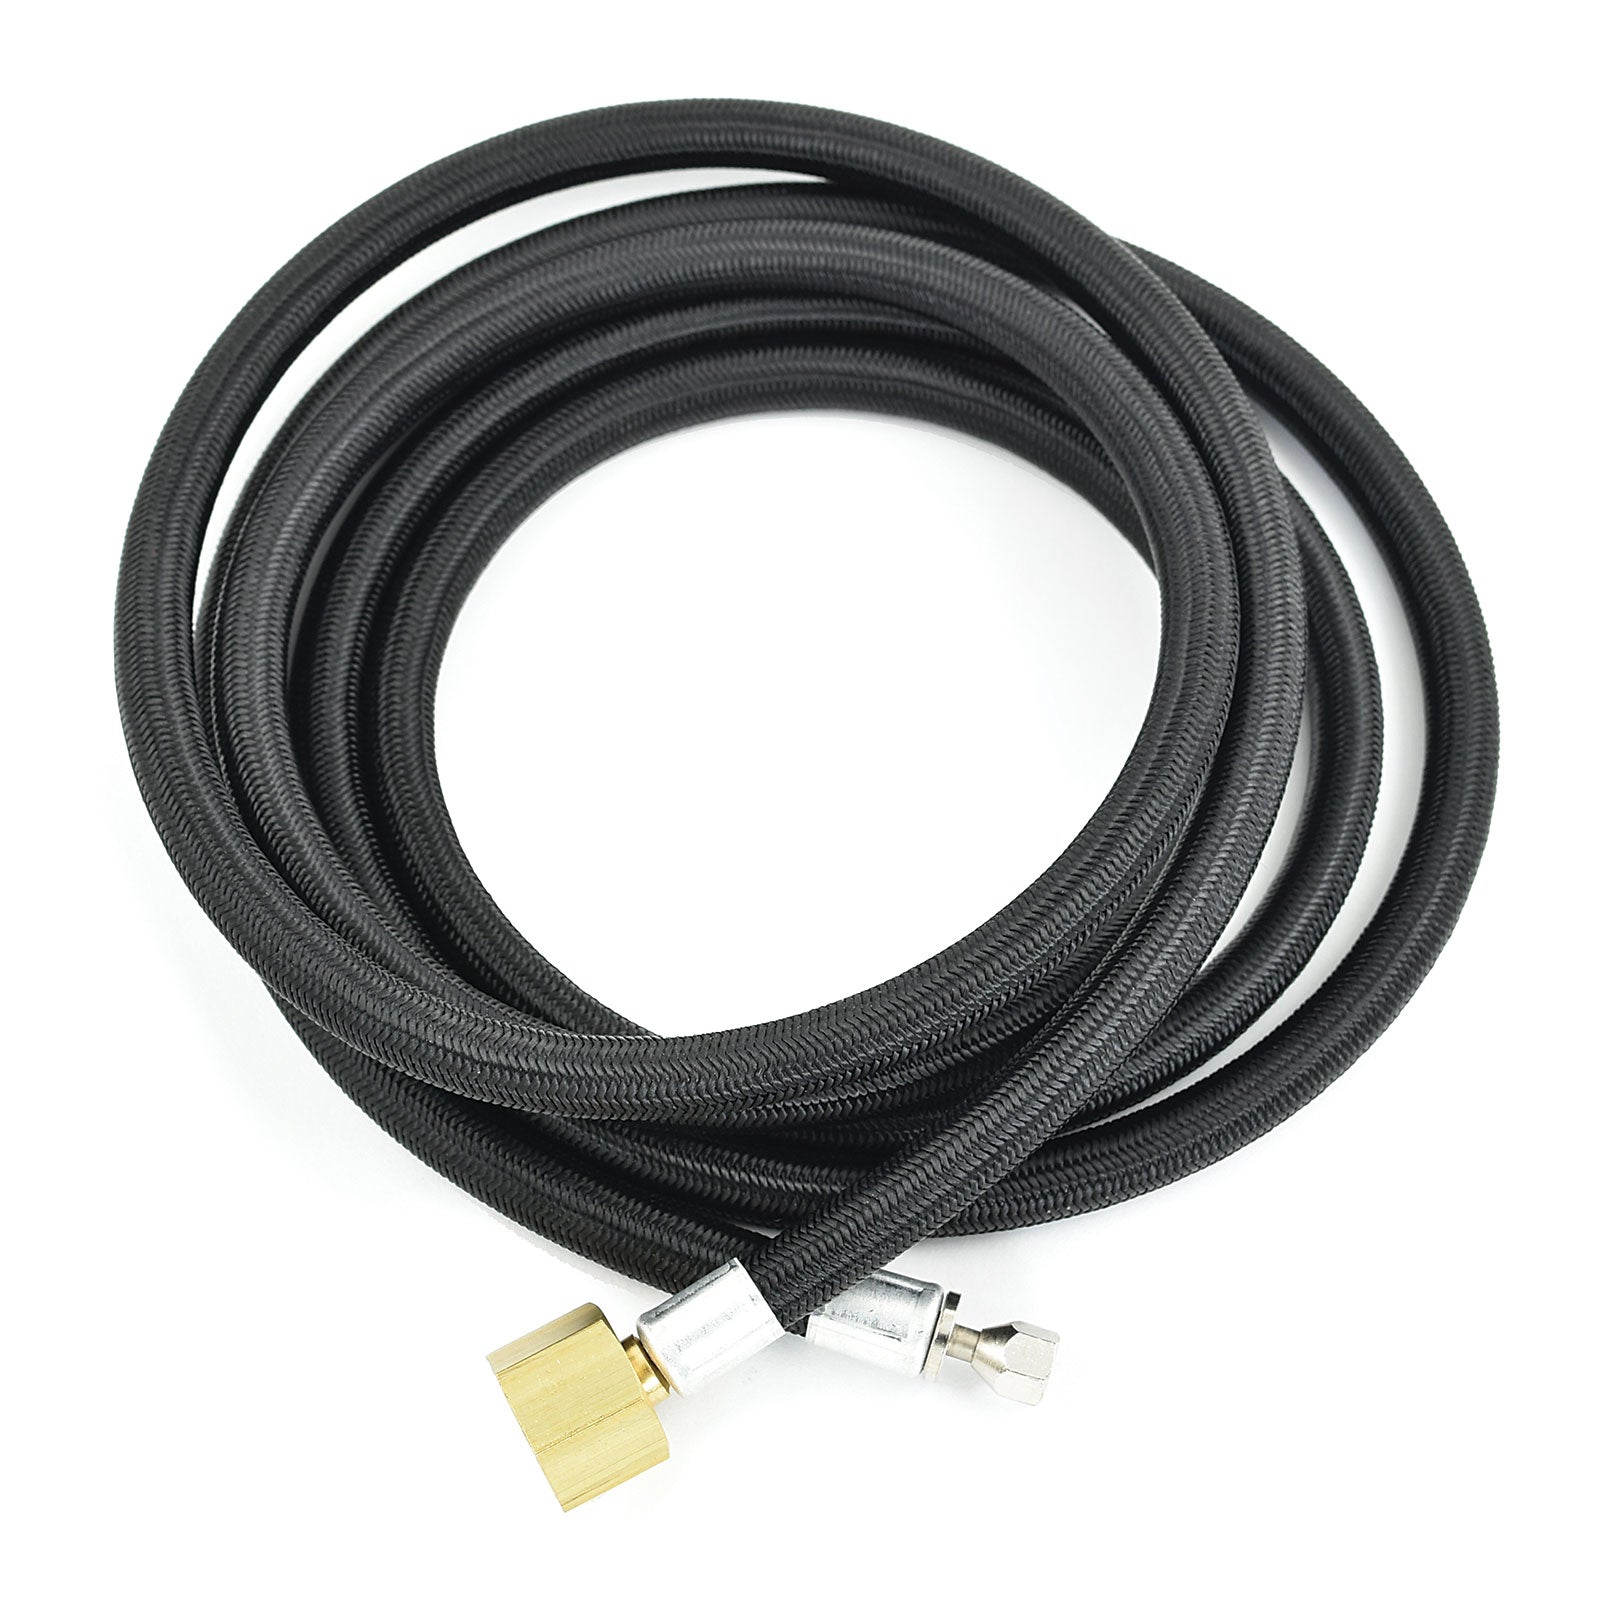 Badger 6' Rubber - Core Airbrush Hose with Braided Exterior